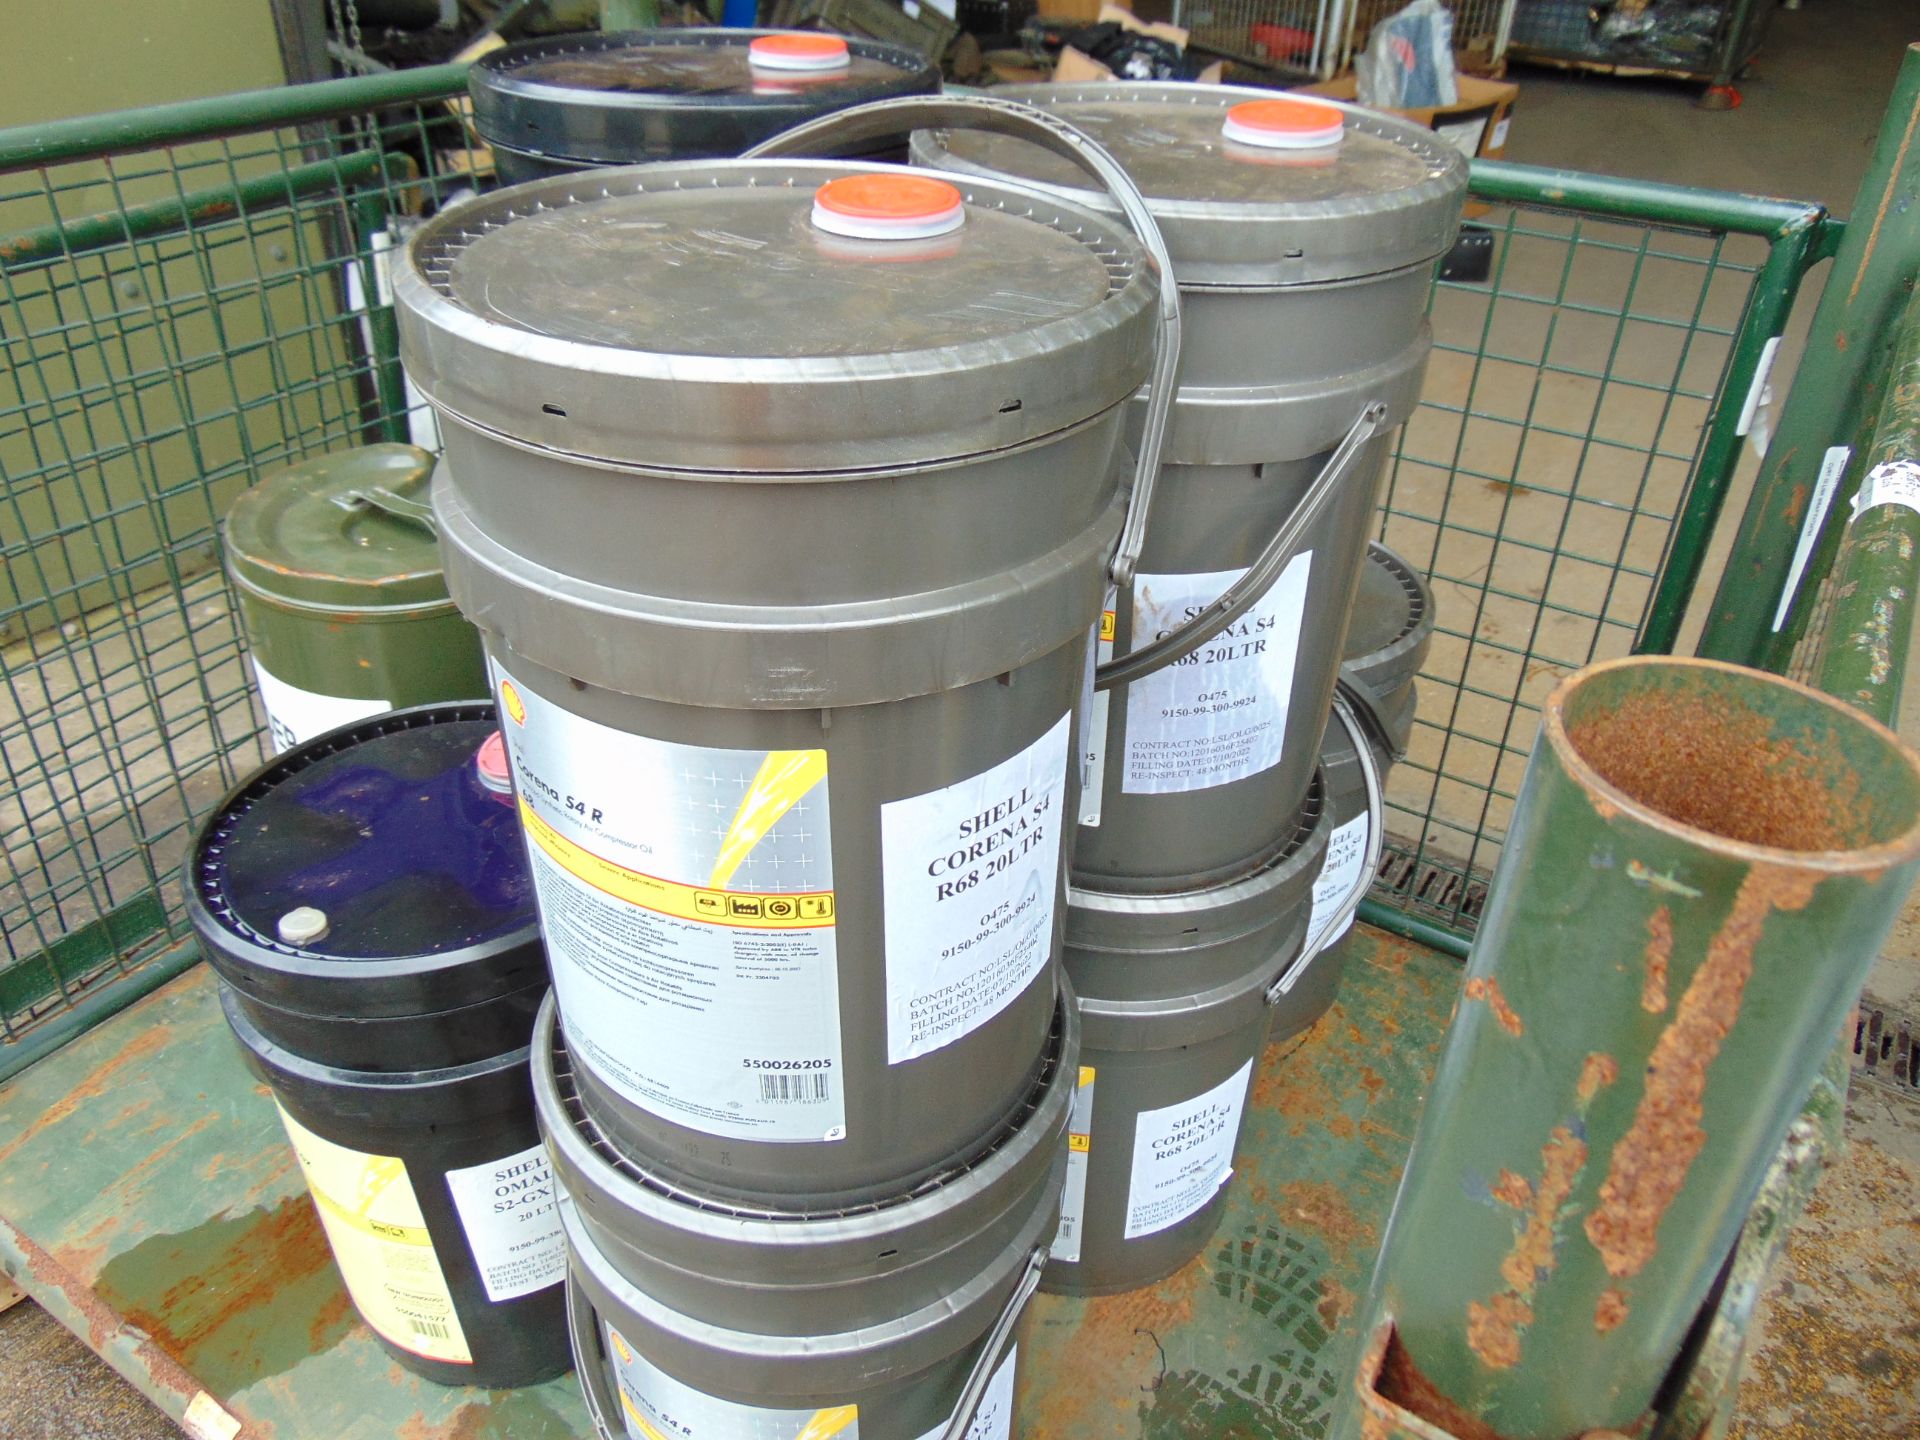 5 x 20 Litre Drums Shell Corena S4R 68, High Quality Lubricating oil New Unissued MoD Reserve Stocks